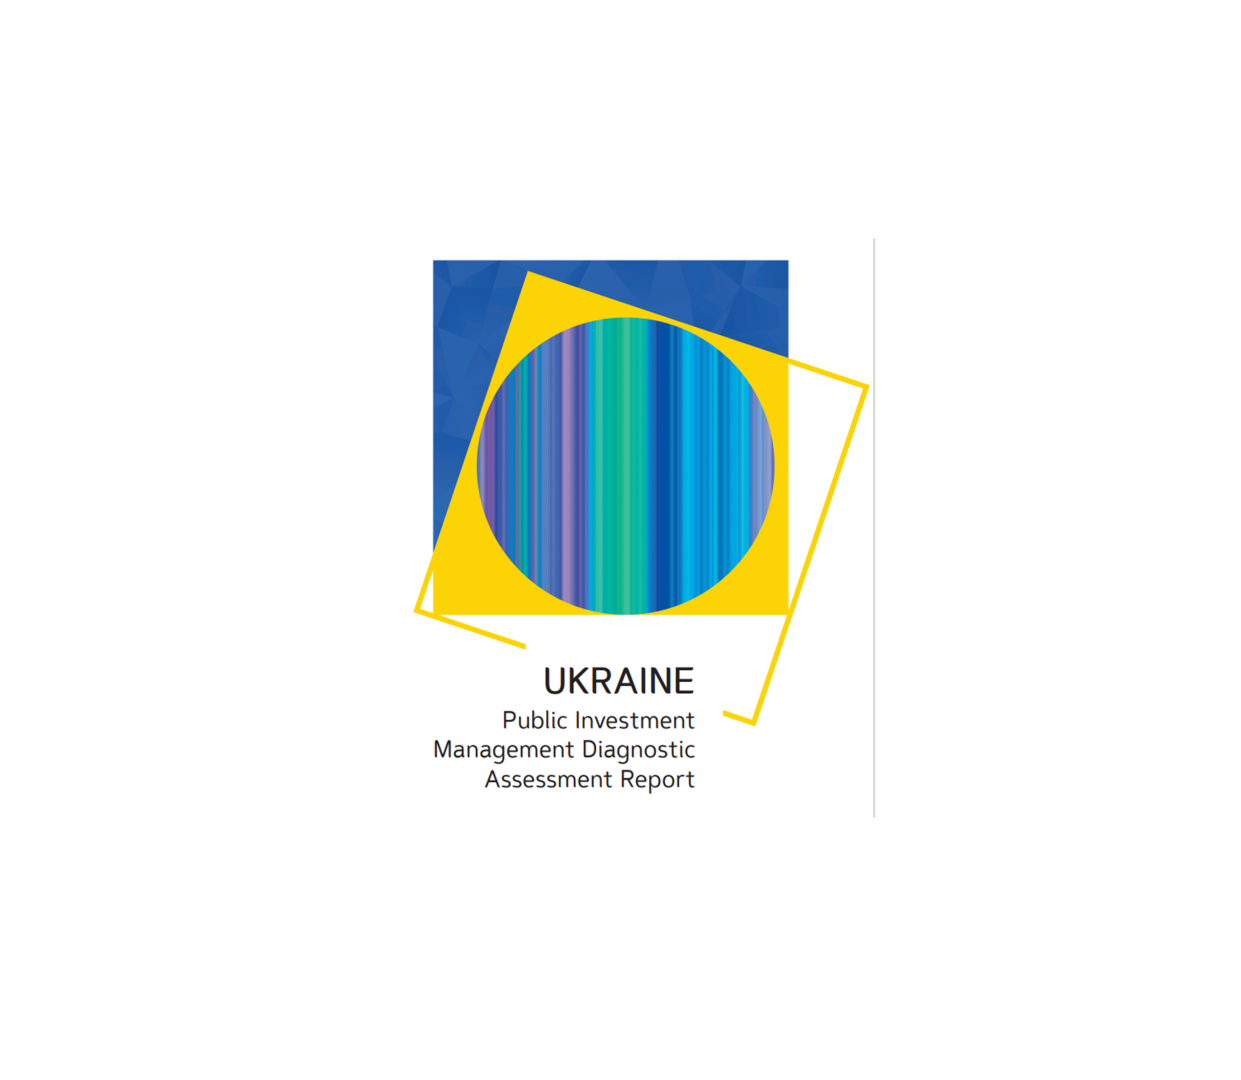 The report Public Investment Management (PIM) Diagnostic Assessment of the Ukrainian Central Government was prepared by the World Bank team